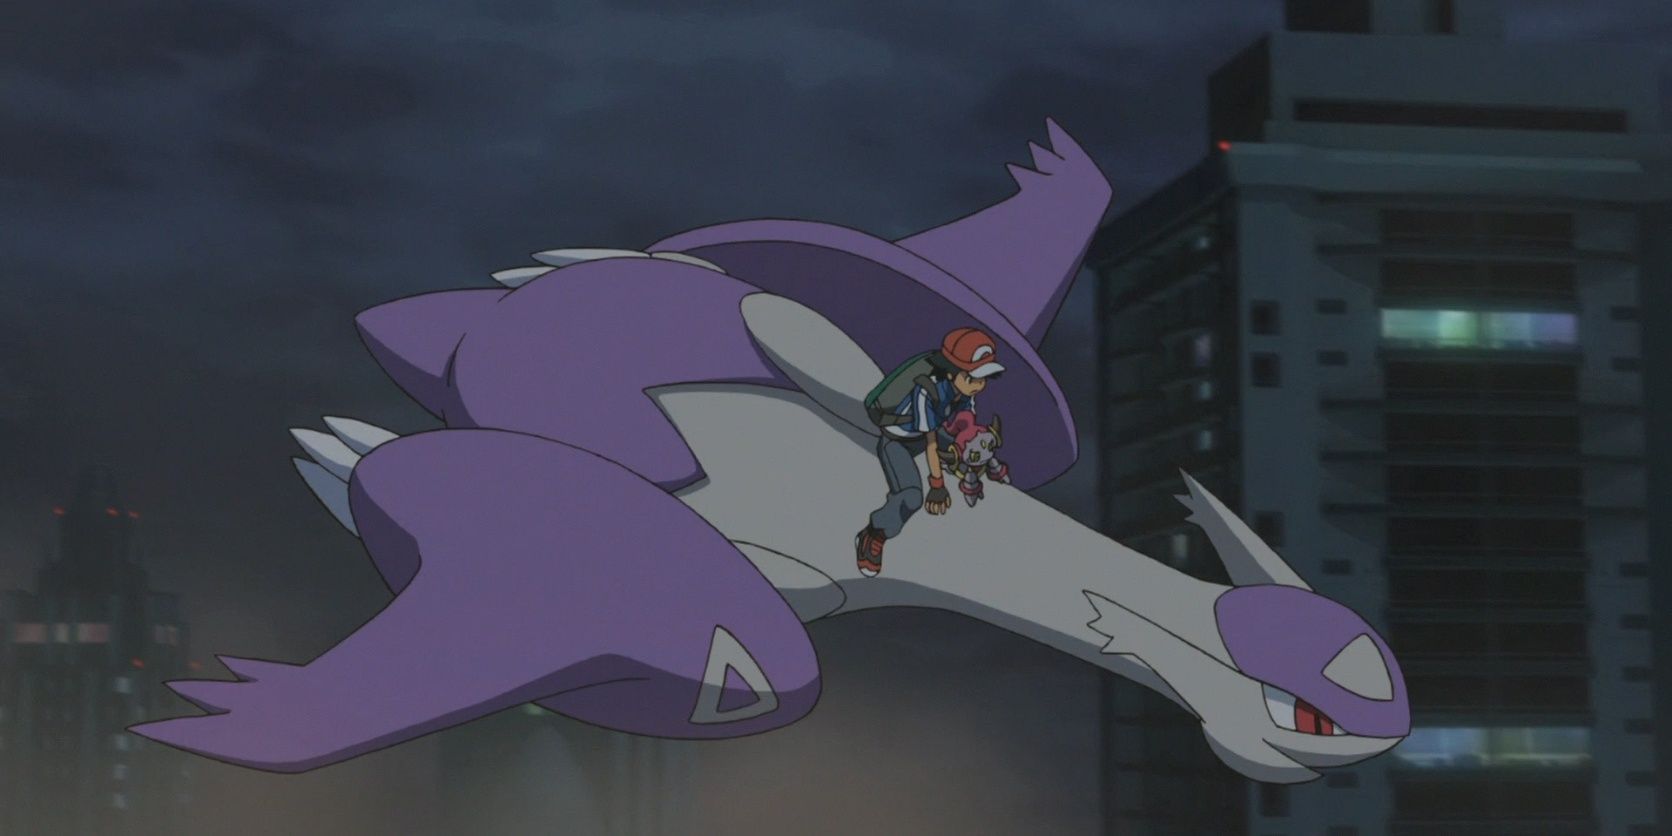 Ash and Hoopa ride on Mega Latios in the Pokemon anime